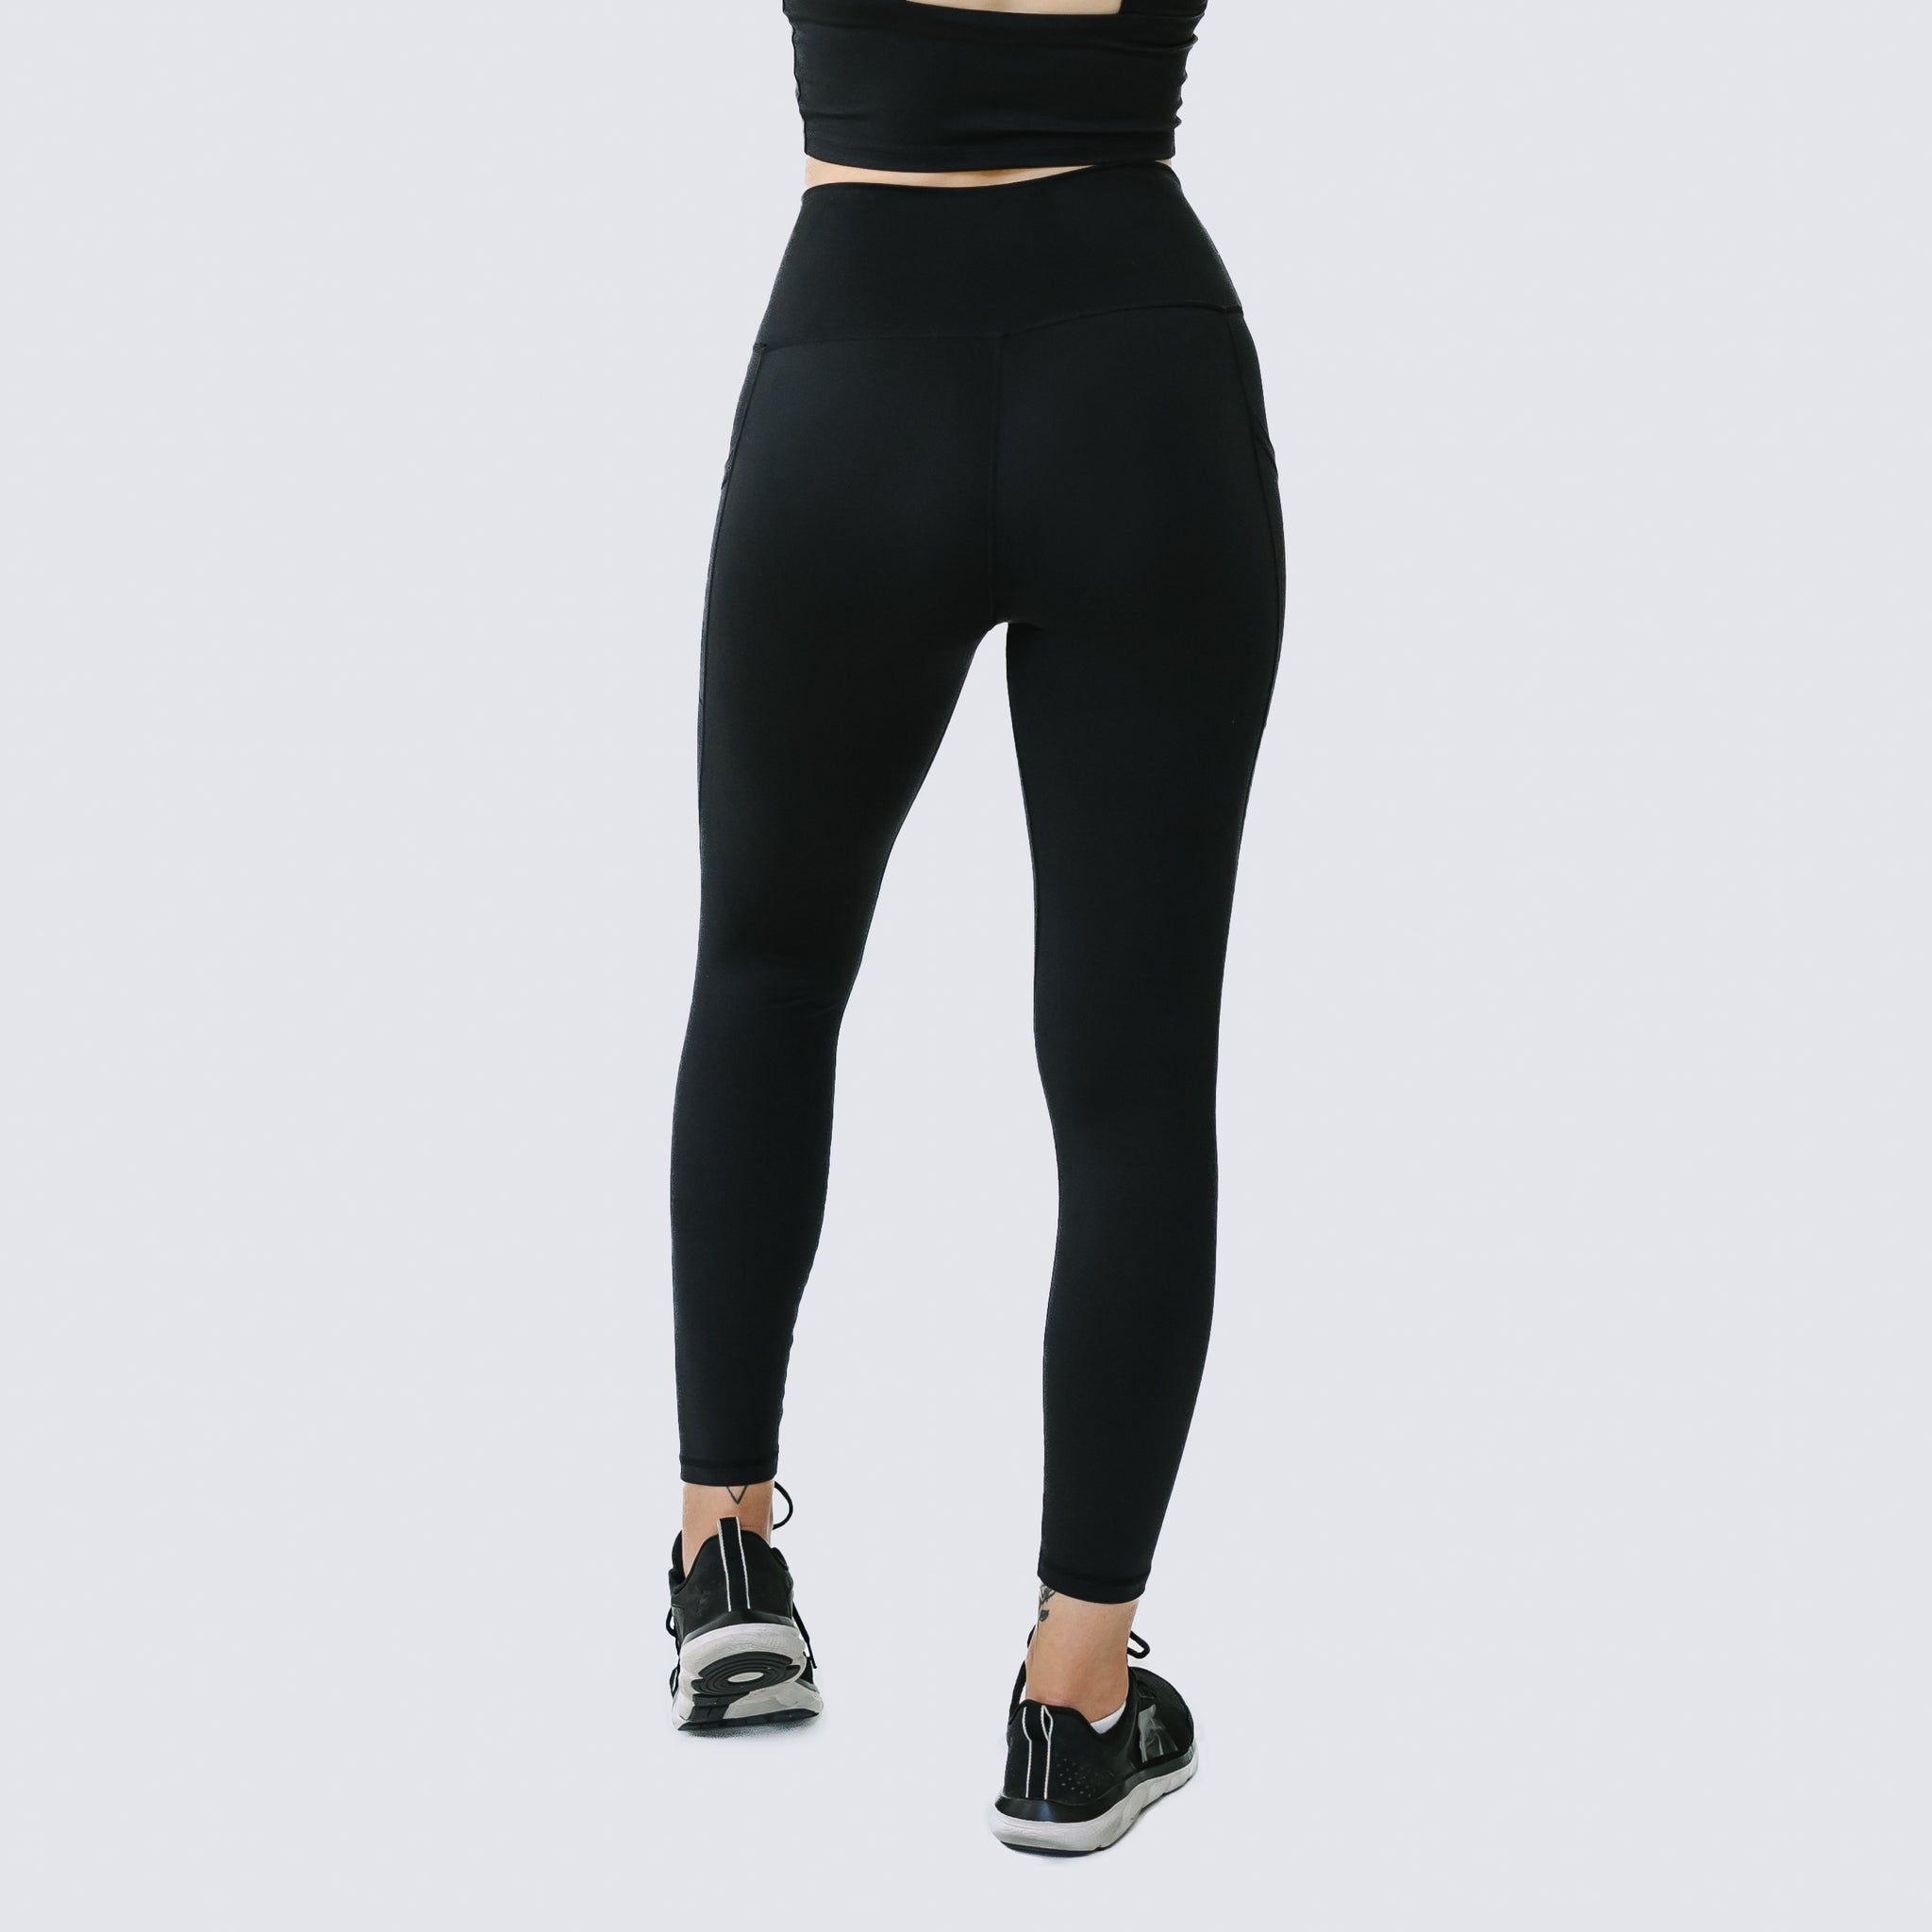 SoftLuxe Stay Put Leggings - Solid Black – Love and Fit | Sweathosen